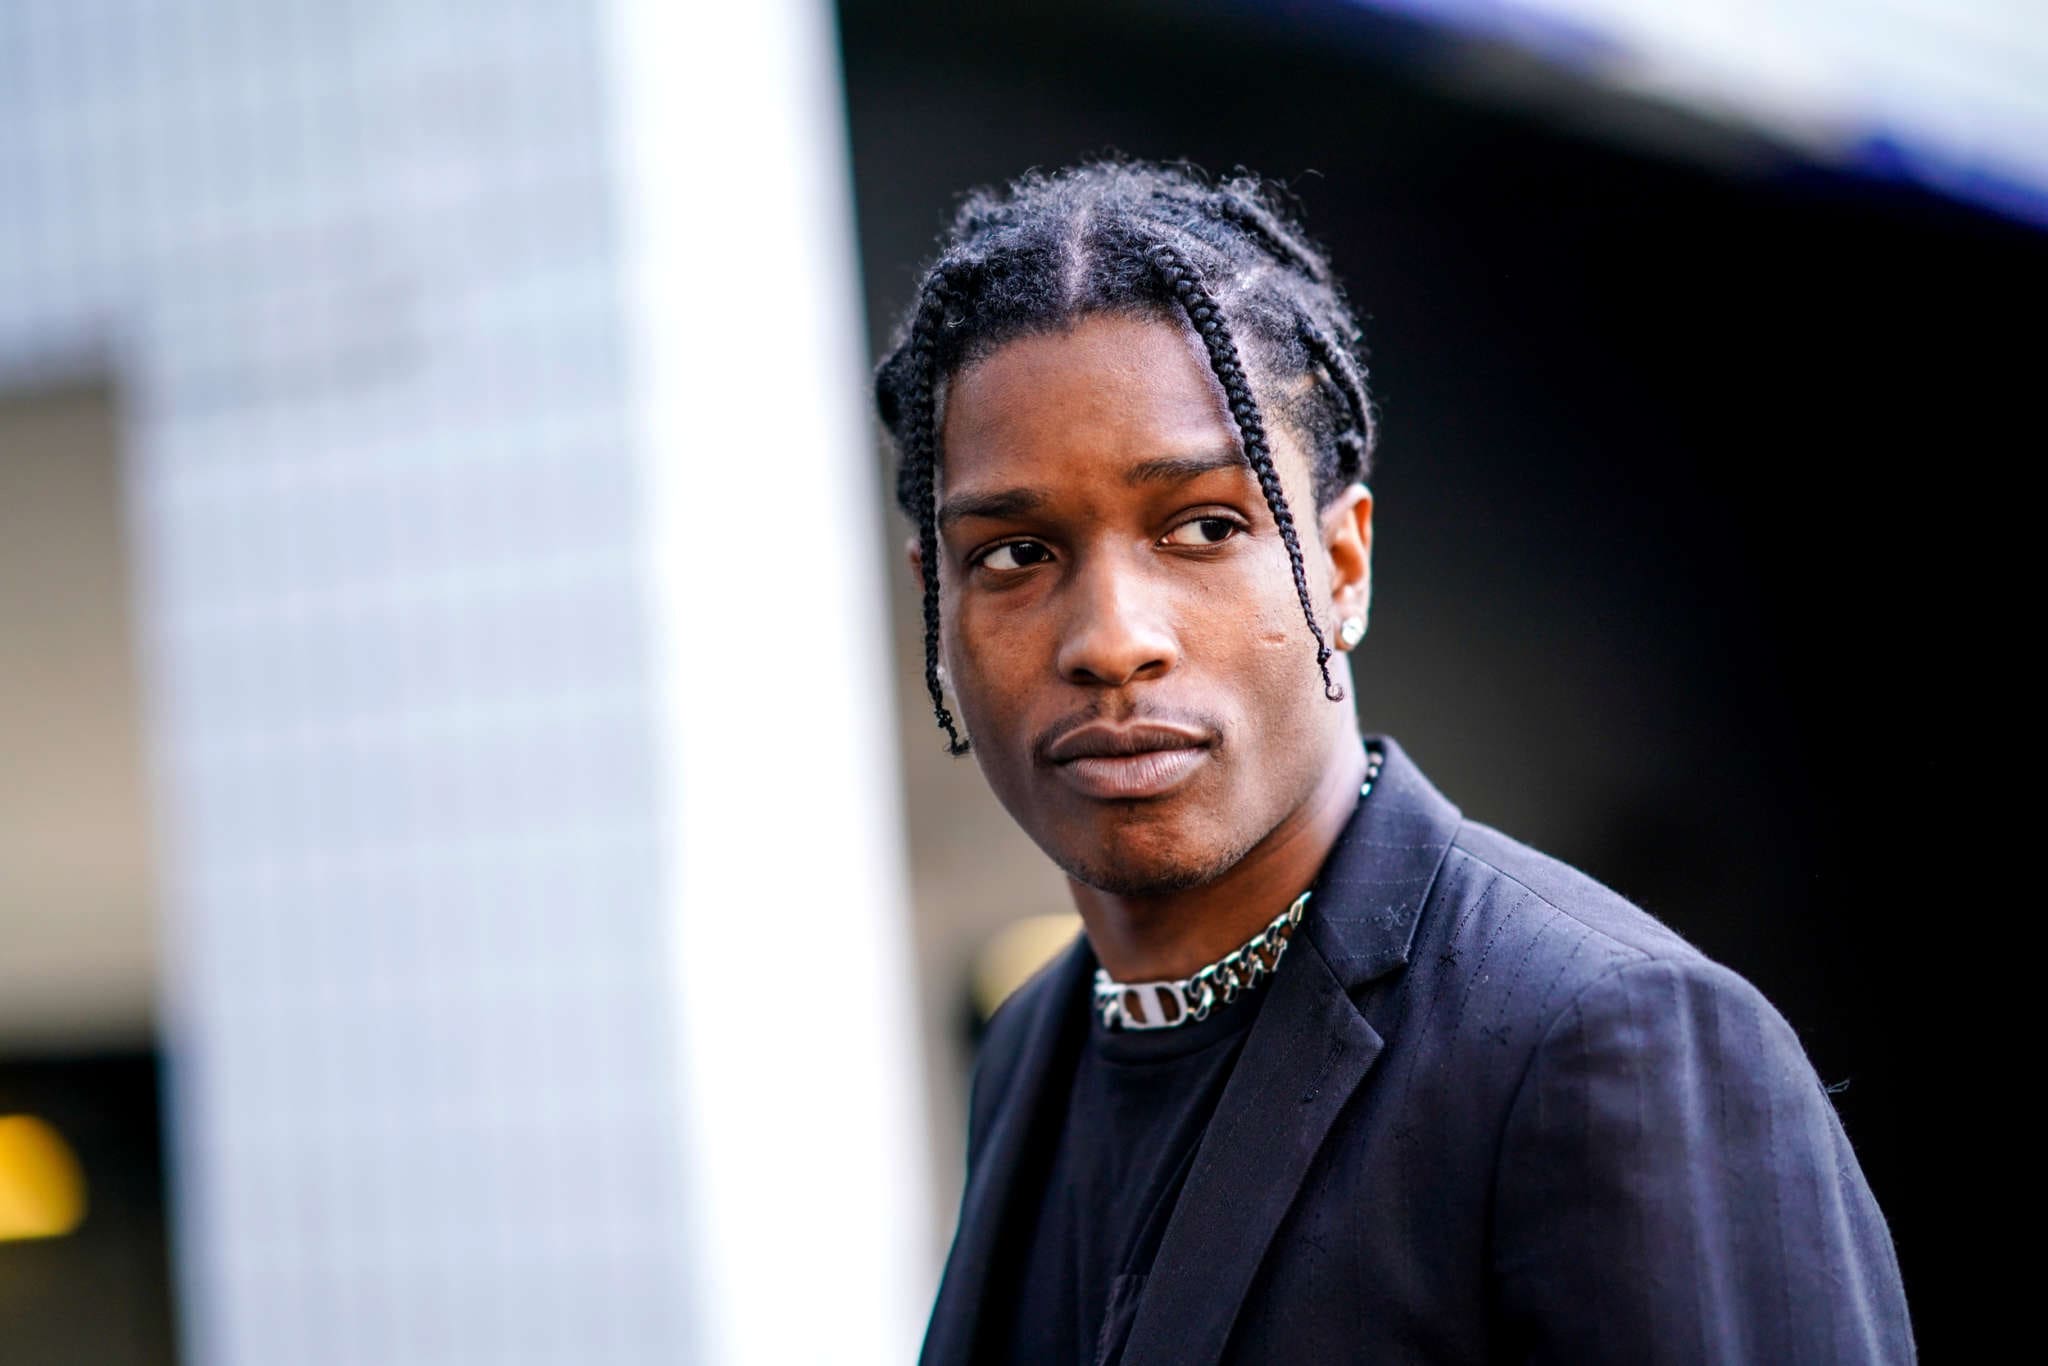 The Man Who Reportedly Assaulted A$AP Rocky Will Not Be Charged By The Swedish Prosecutors